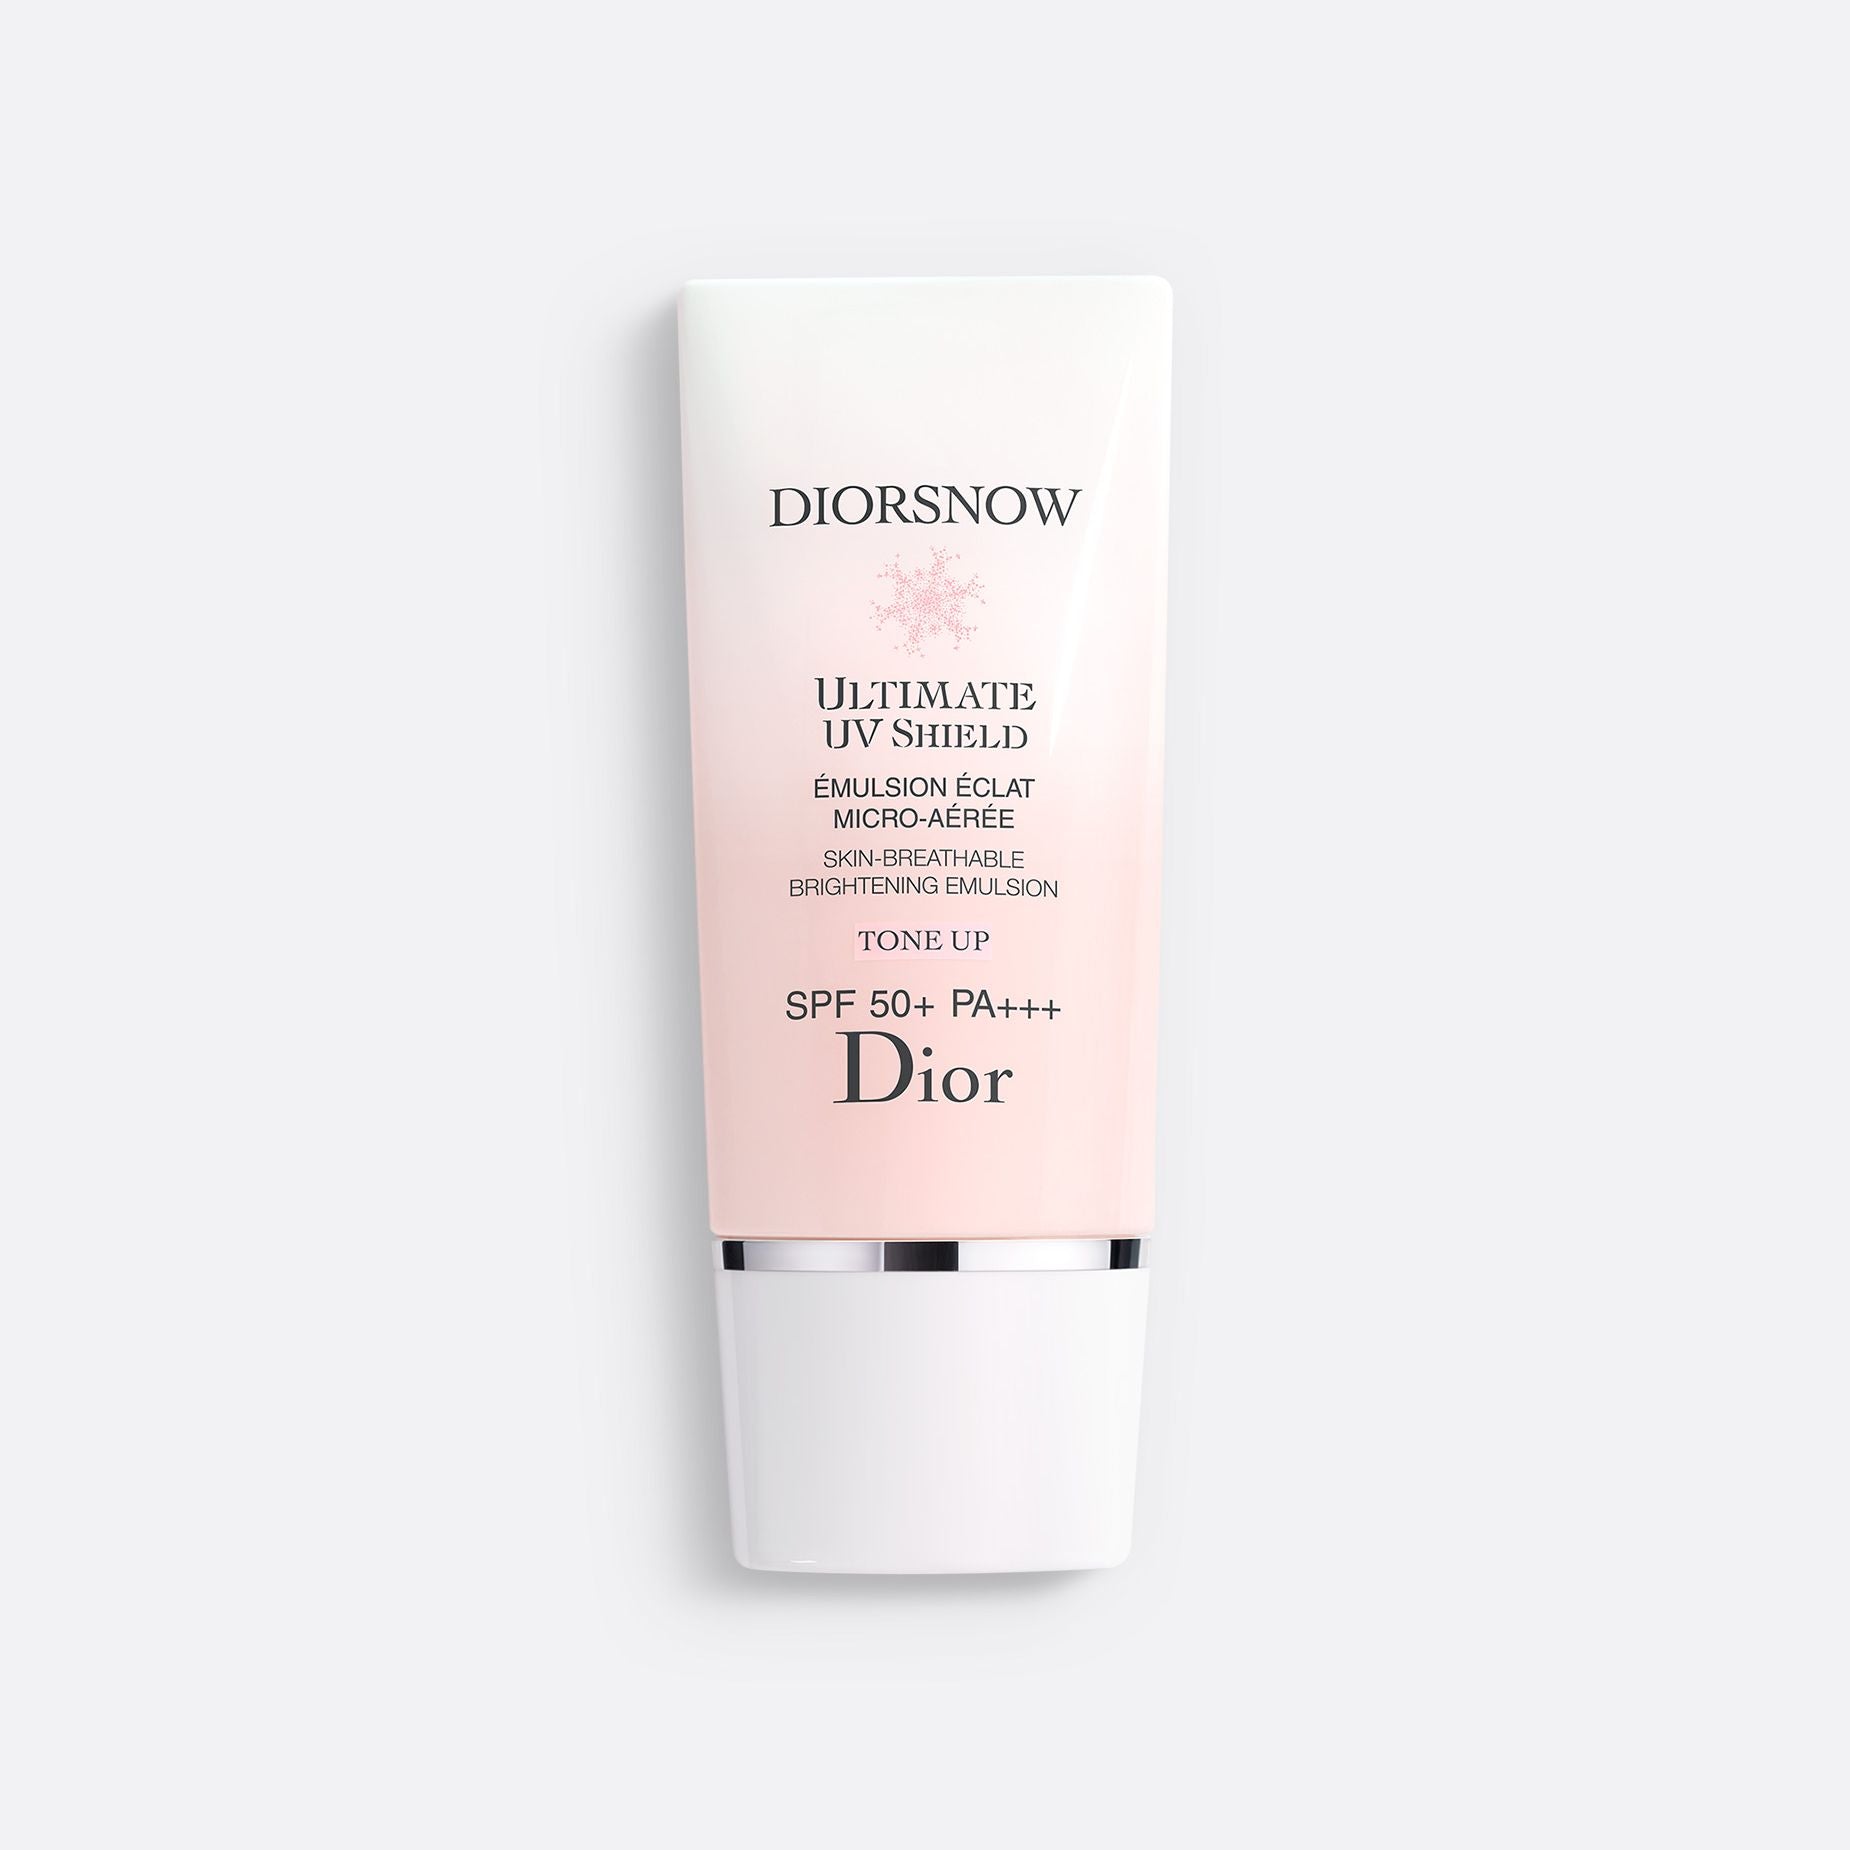 DIORSNOW ULTIMATE UV SHIELD TONE UP ~ Skin-Breathable Brightening Emulsion - Tinted Skincare - SPF 50+ PA+++